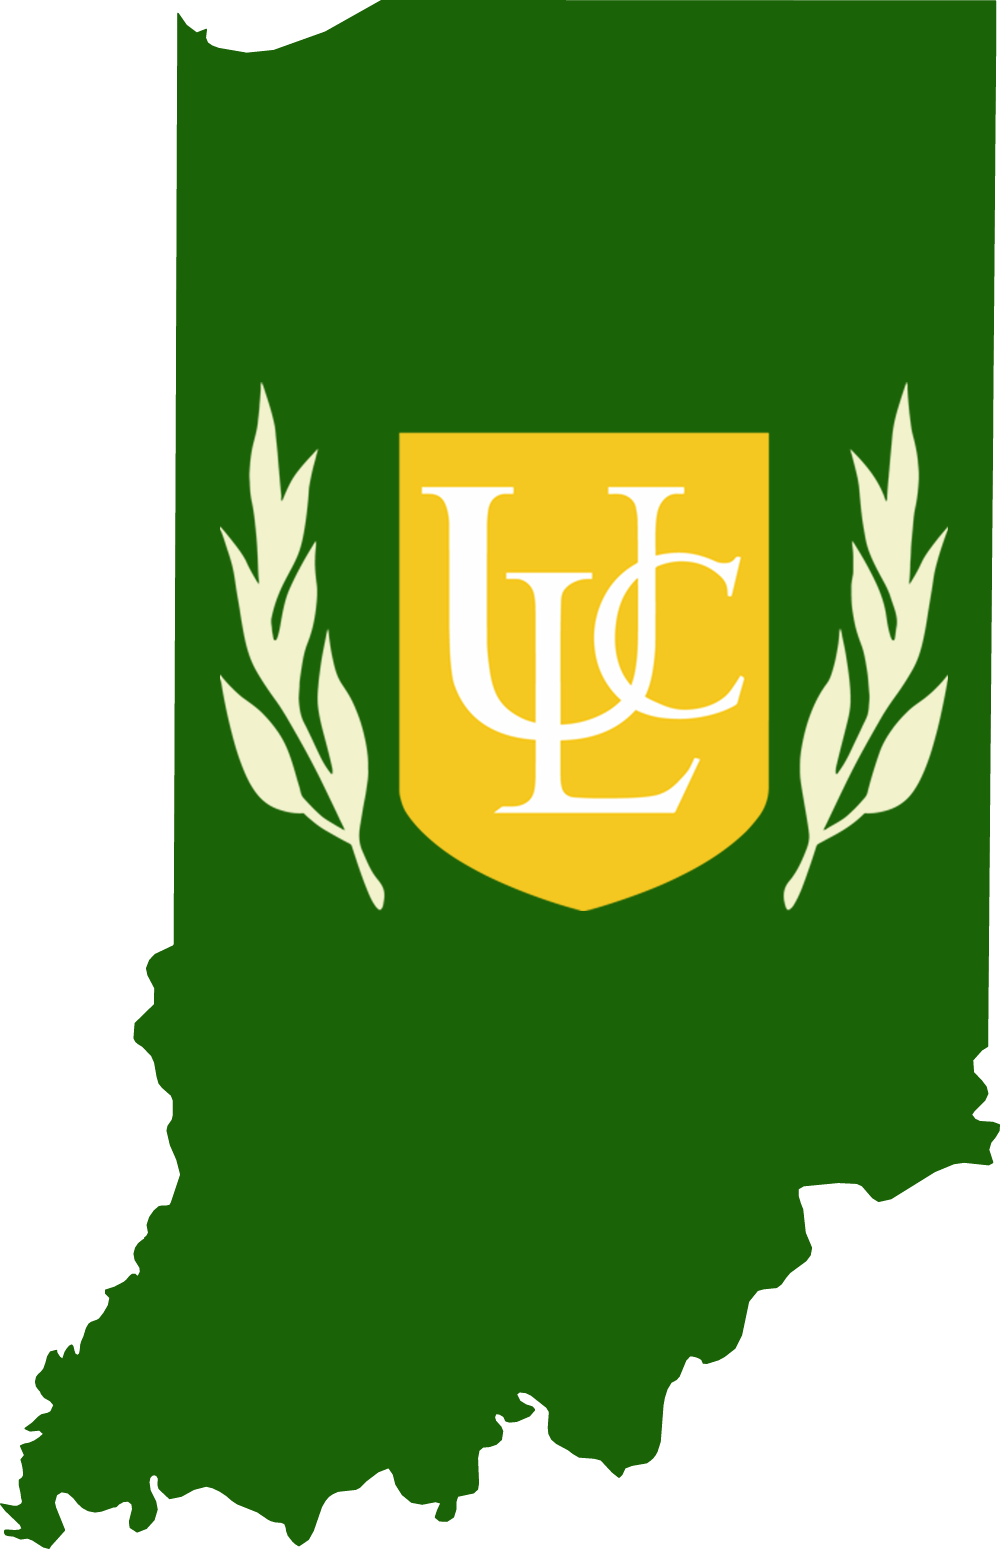 An outline of IN with the ULC logo